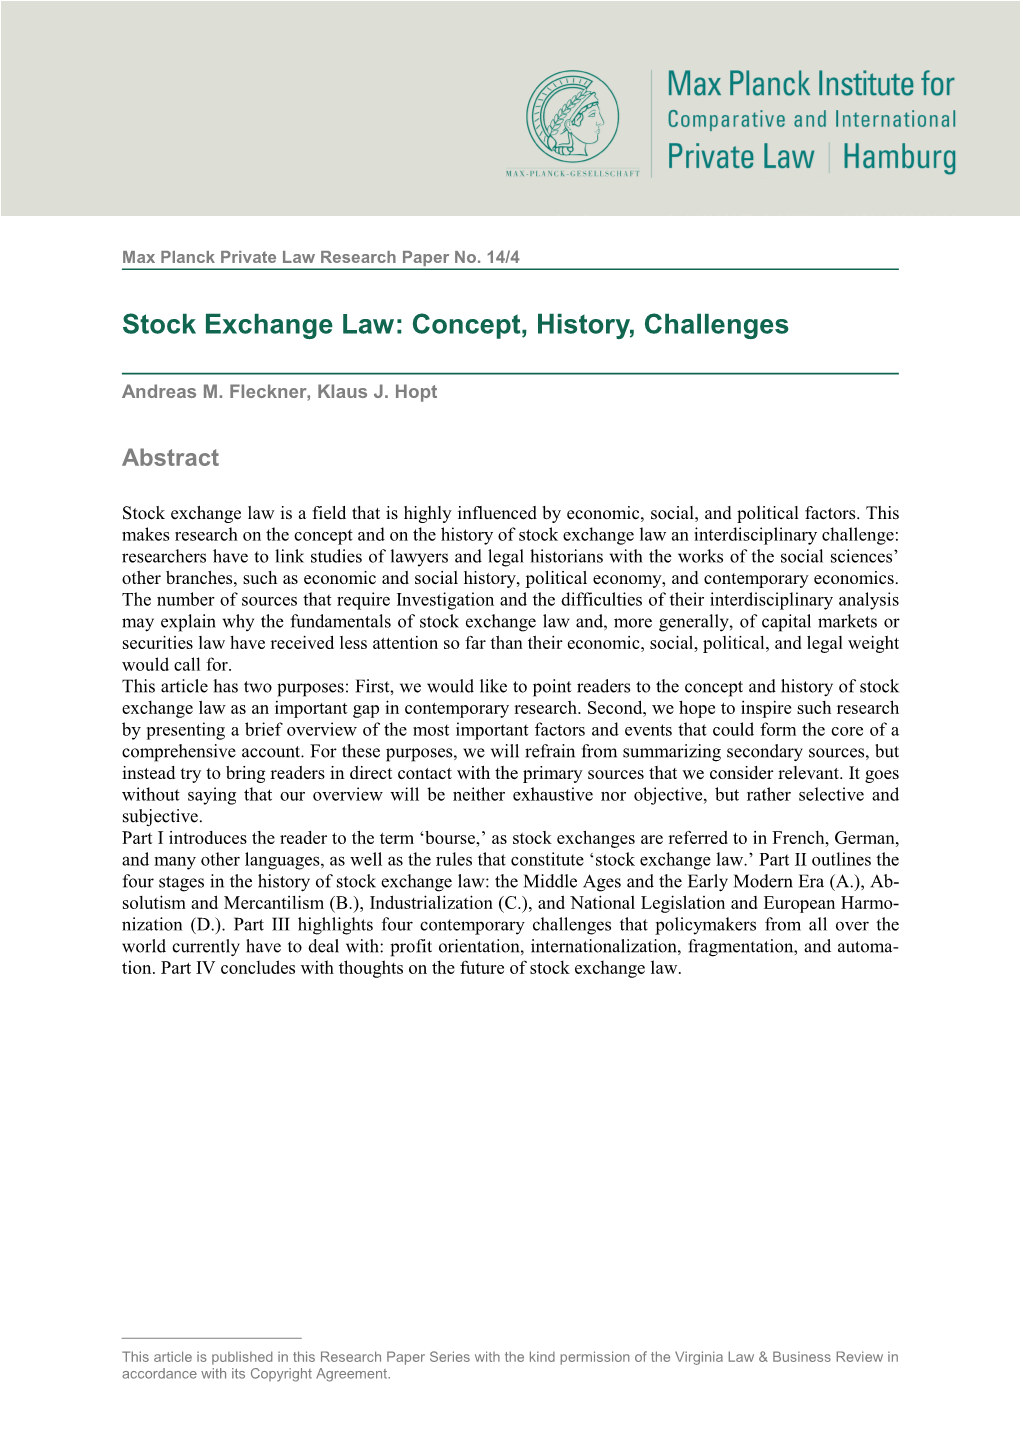 Stock Exchange Law: Concept, History, Challenges